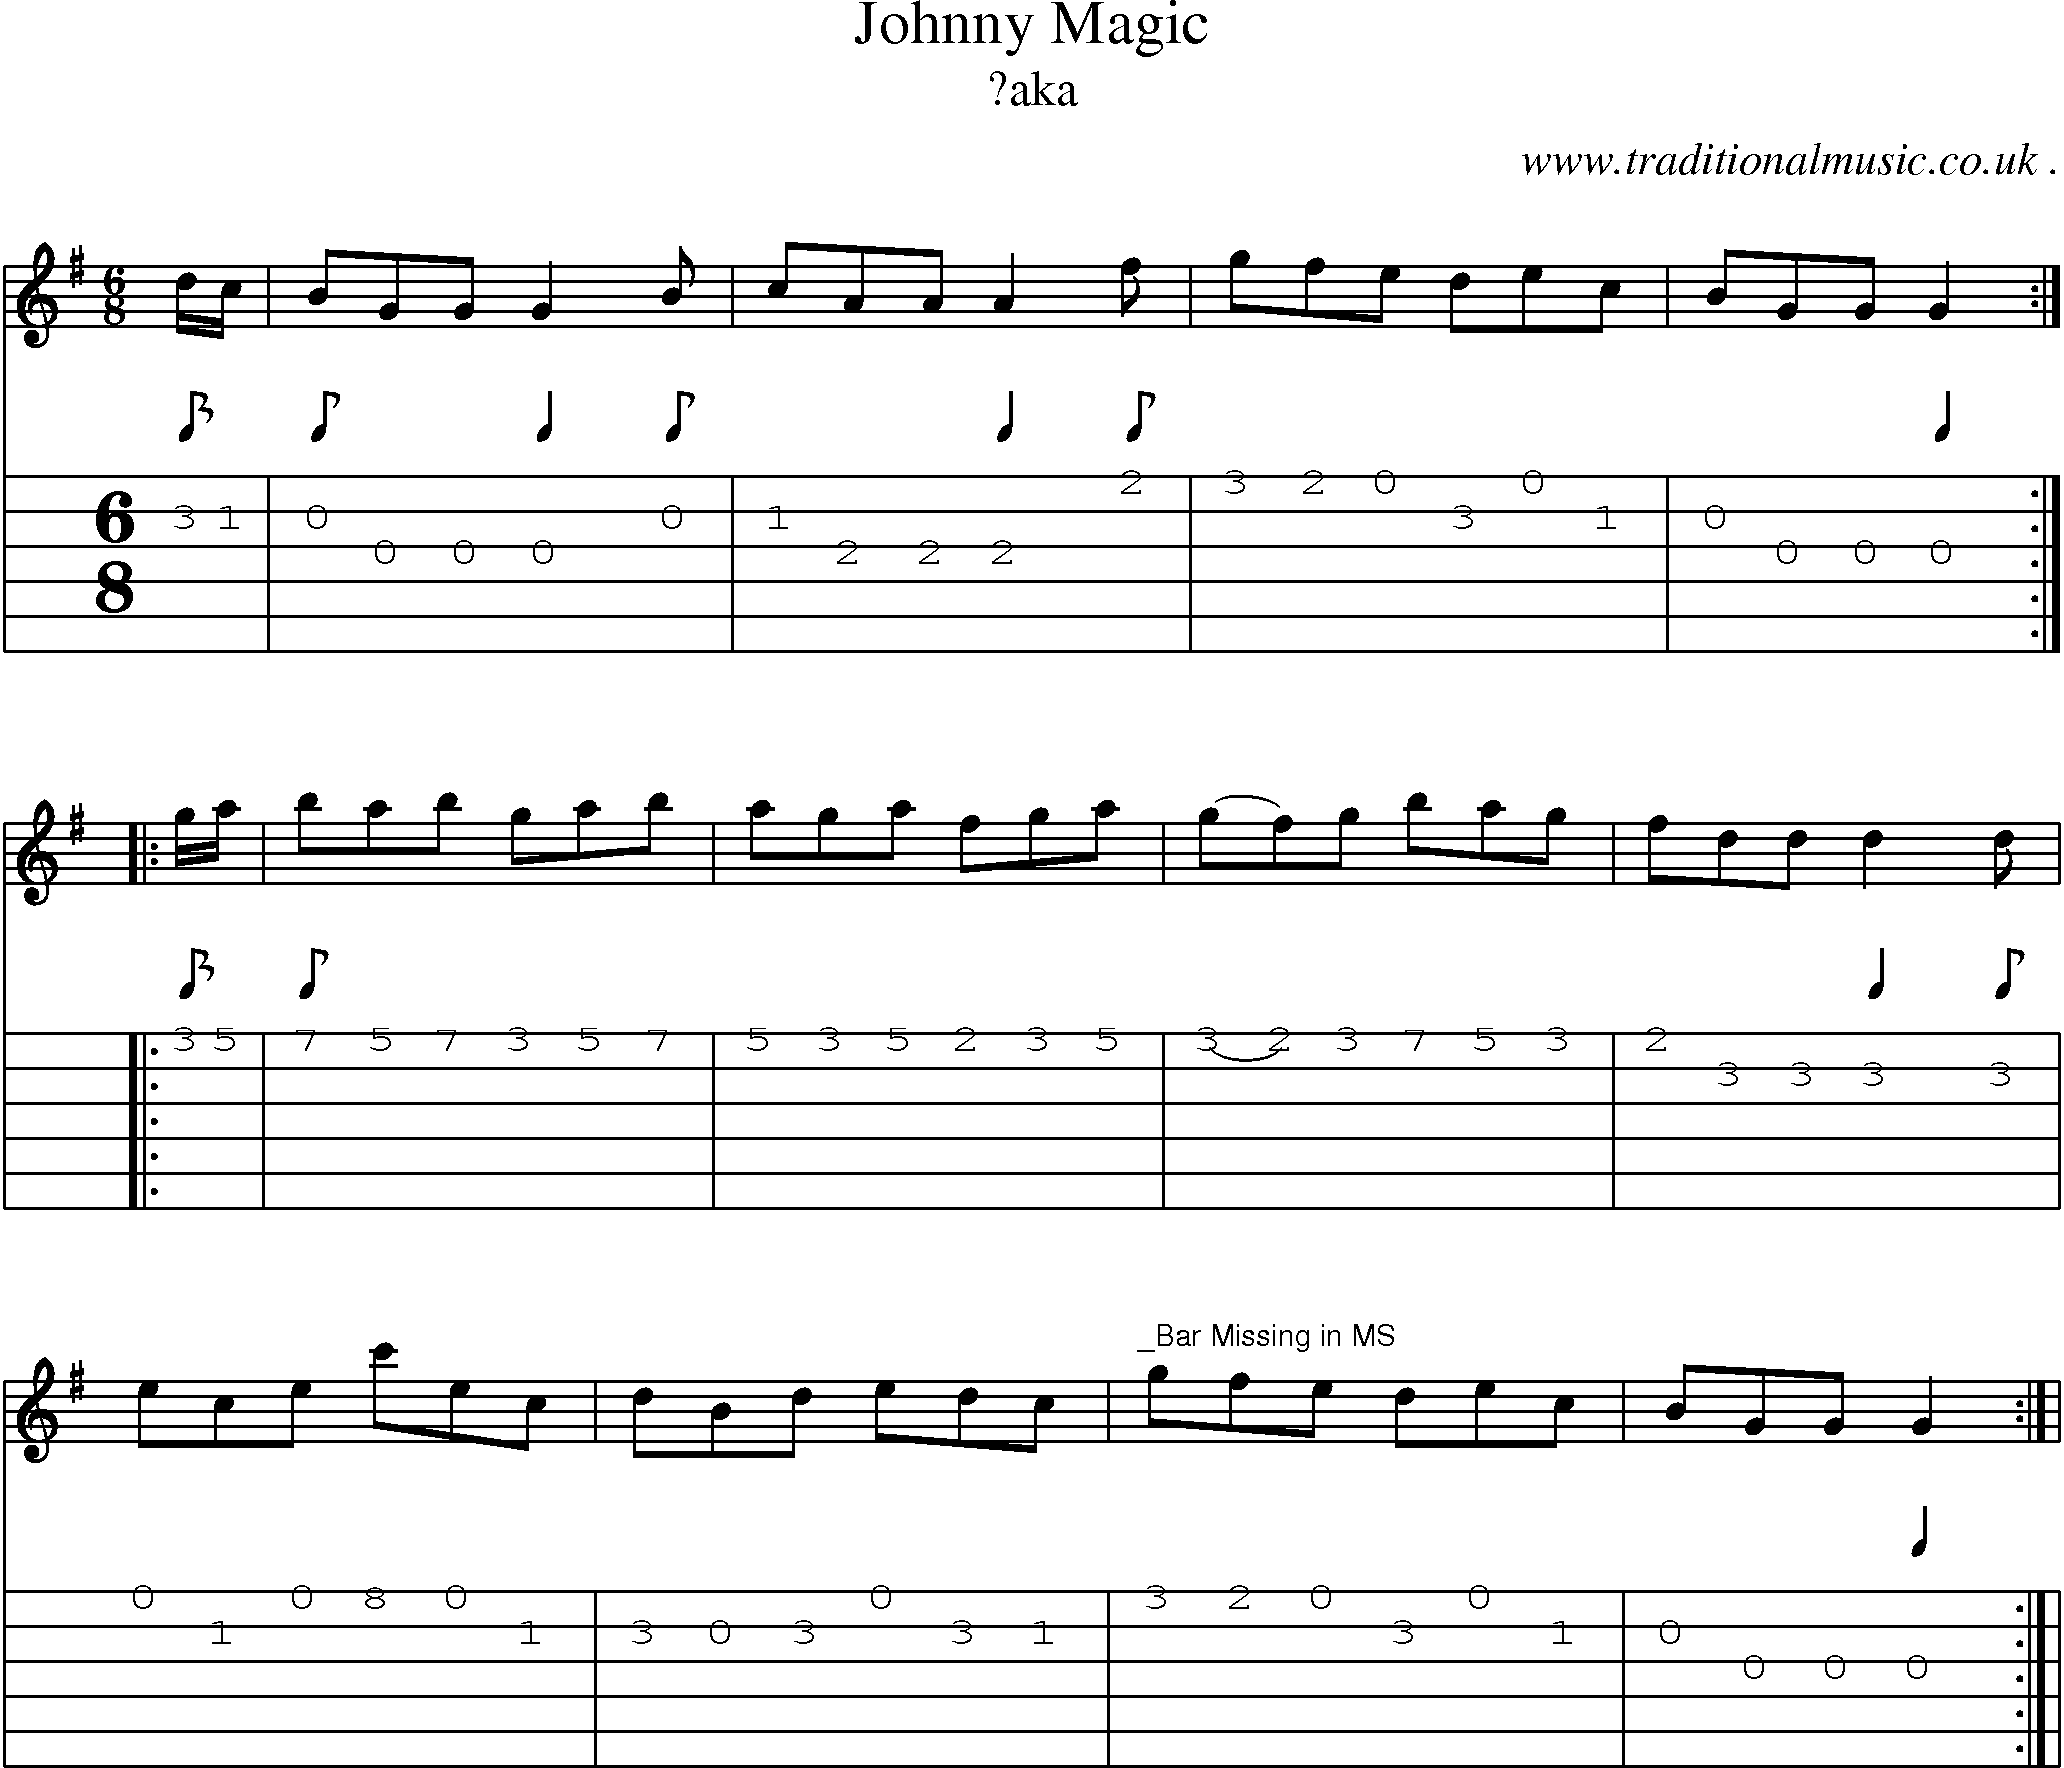 Sheet-Music and Guitar Tabs for Johnny Magic